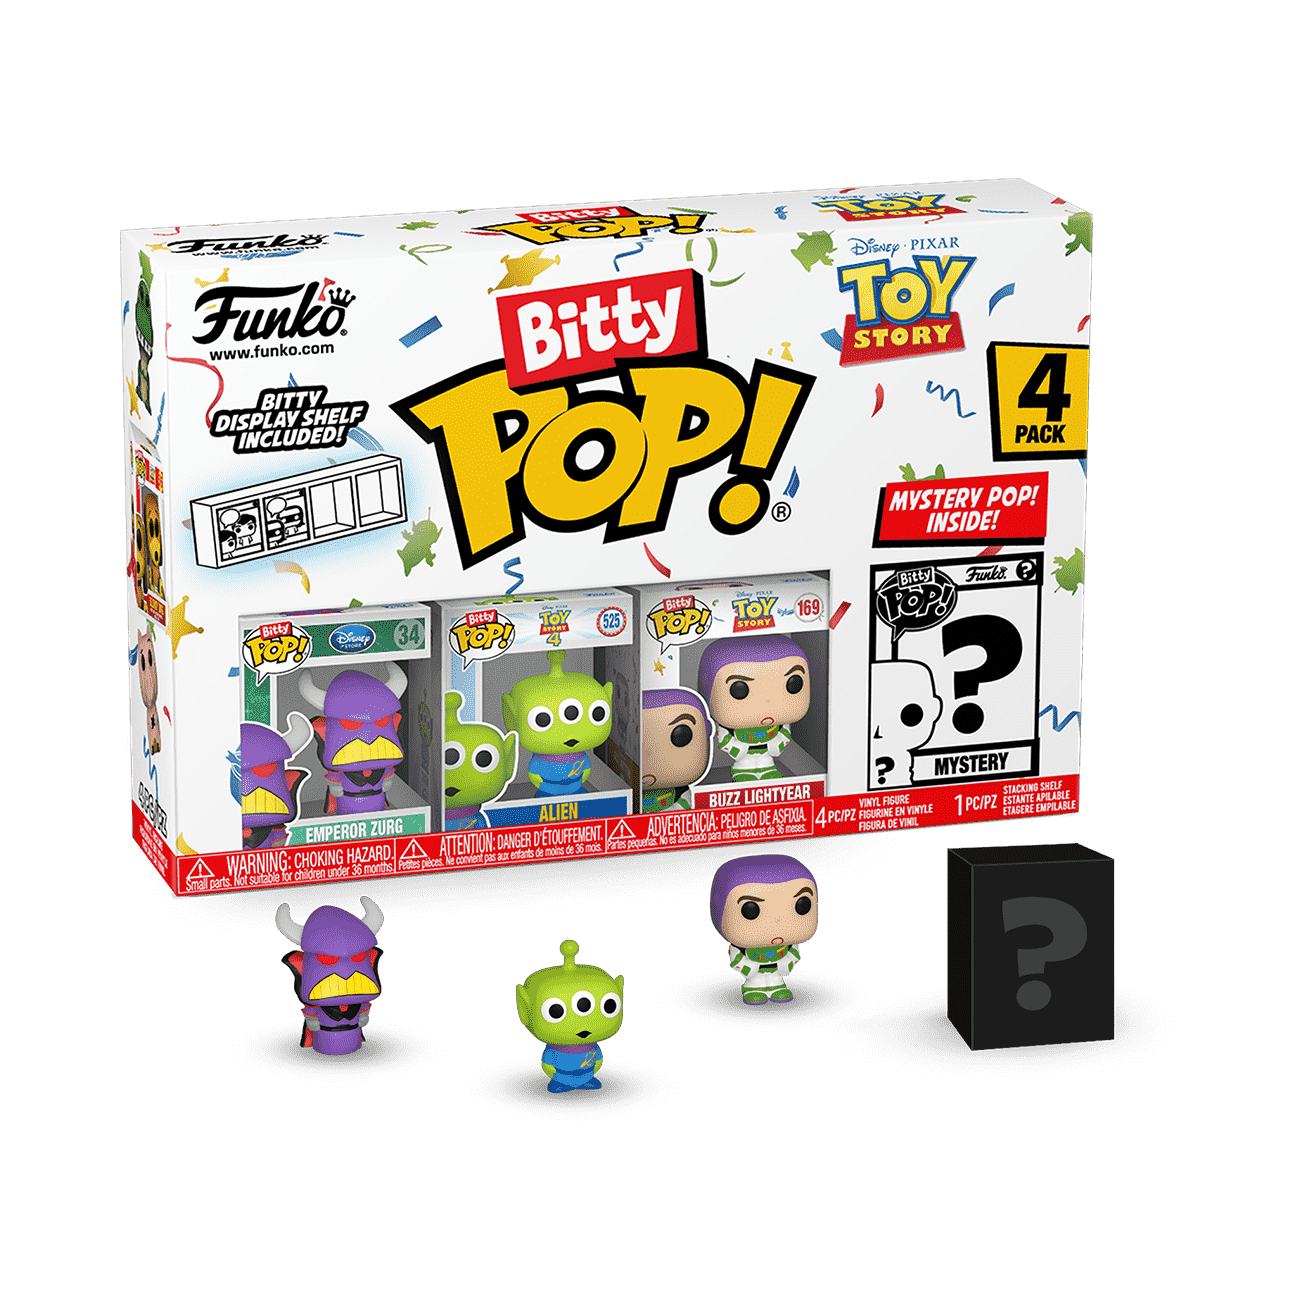 Buy Bitty Pop! Toy Story 4-Pack Series 4 at Funko.